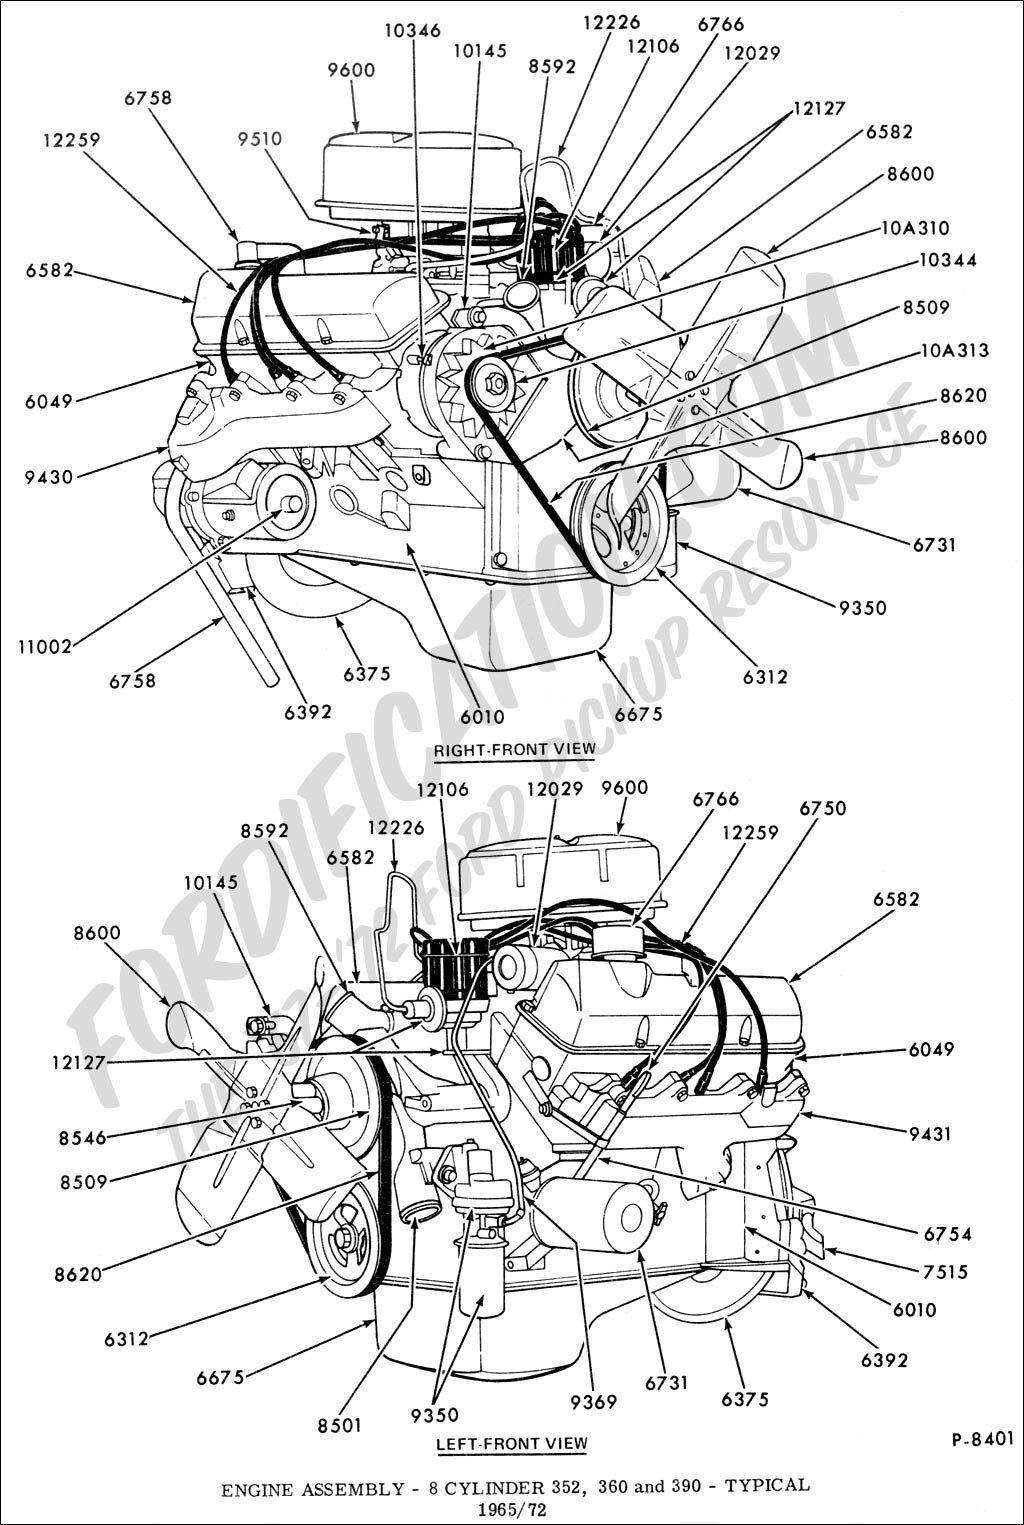 Engine Assembly - 8 Cylinder 352, 360, 390 (Fe) - Typical